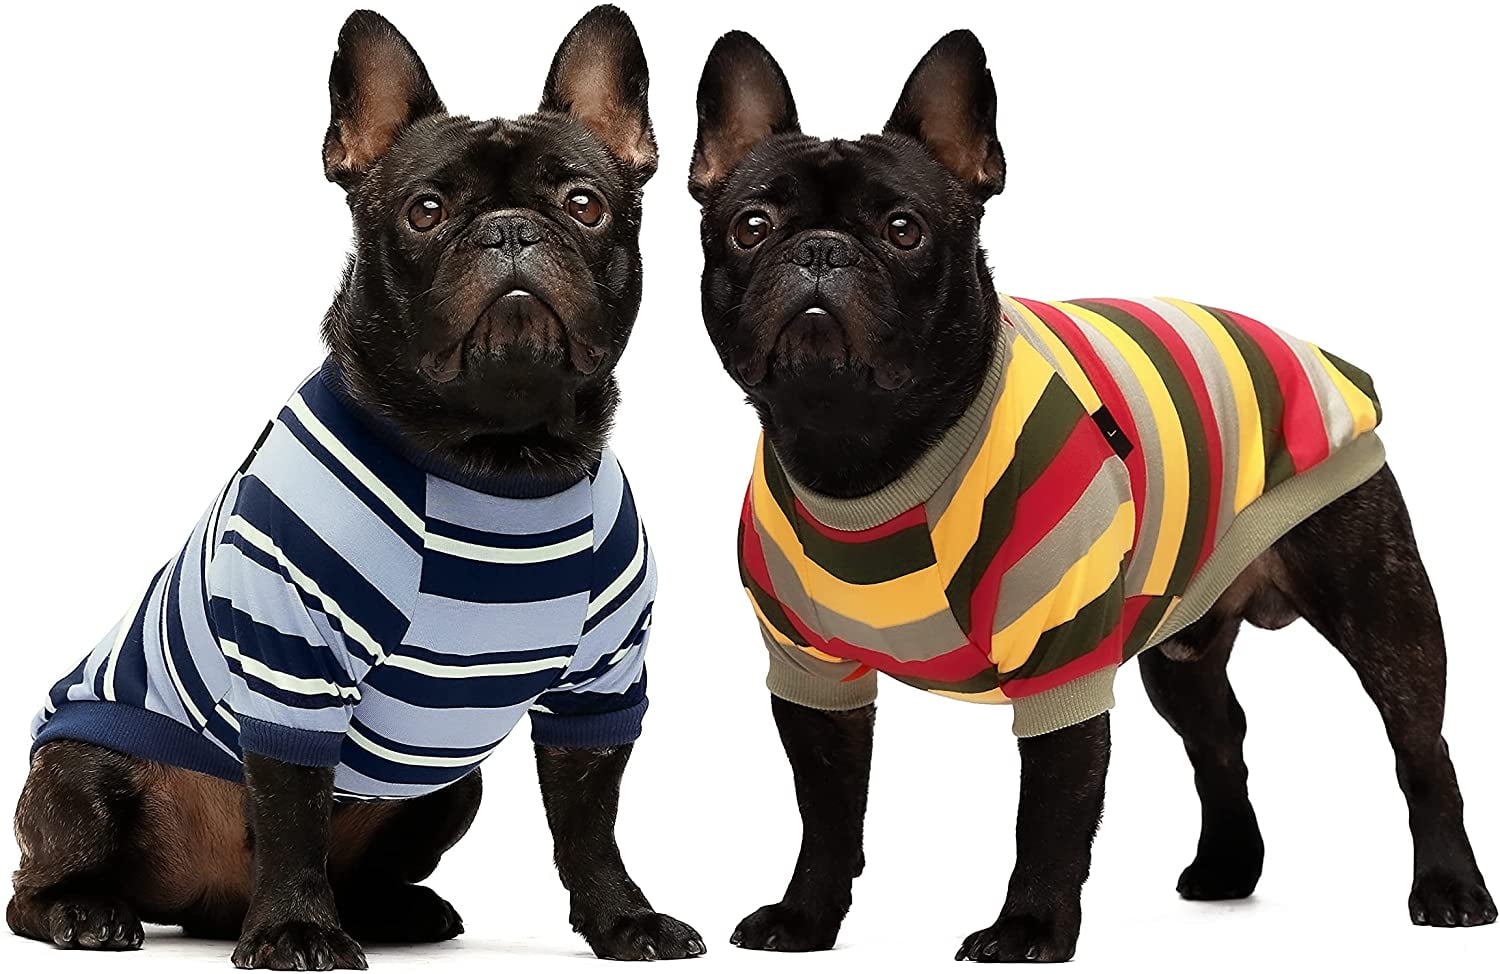 Fitwarm 2-Pack 100% Cotton Striped Dog Shirt for Pet Clothes Puppy T-Shirts Cat Tee Breathable Stretchy Black-White Red-Blue 